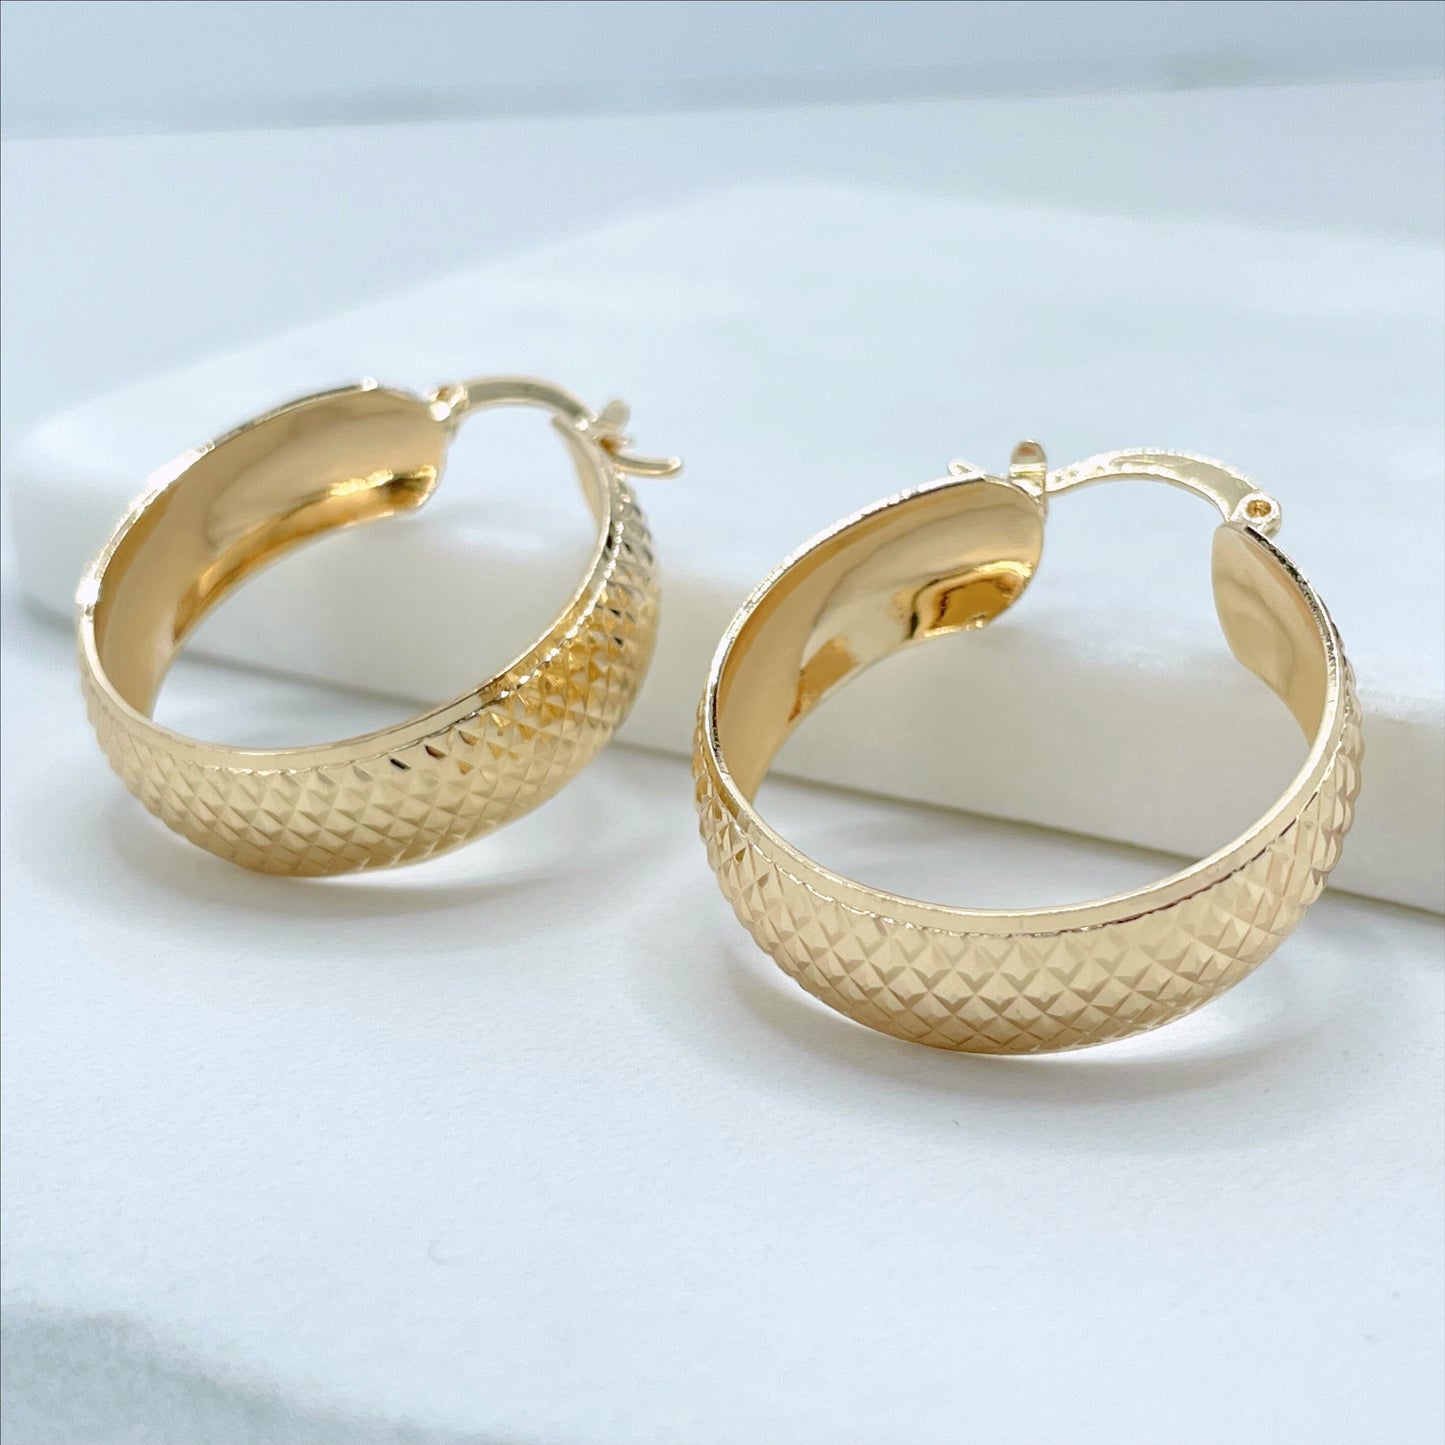 18k Gold Filled 30mm Textured Hoop Earrings, 9mm Thickness, Wholesale Jewelry Making Supplies